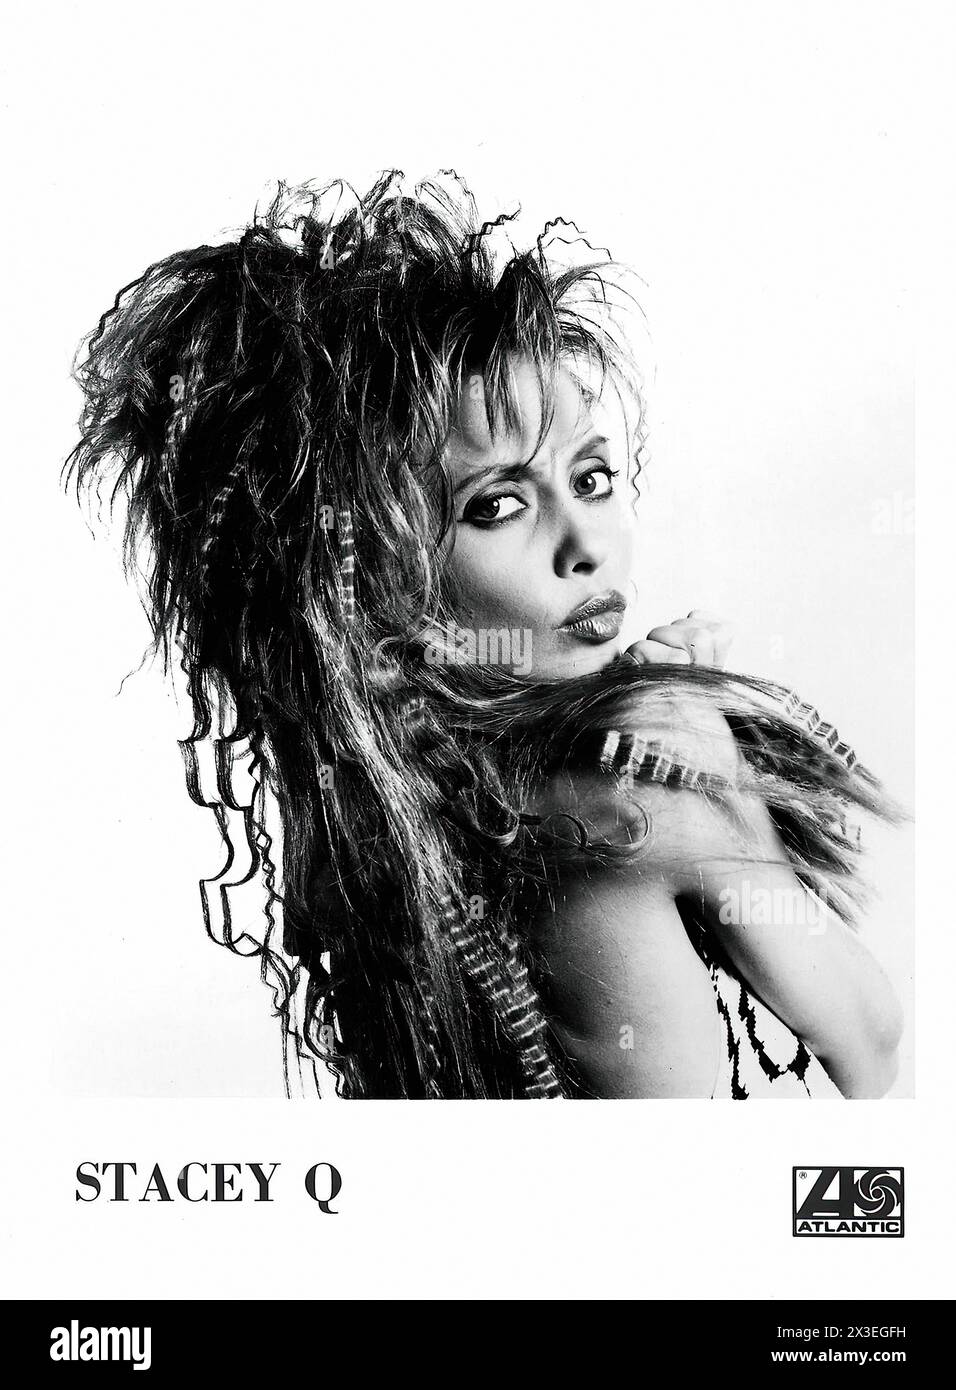 Stacey Q  - Vintage music label promotional picture - Photographer unknow, for editorial use only Stock Photo